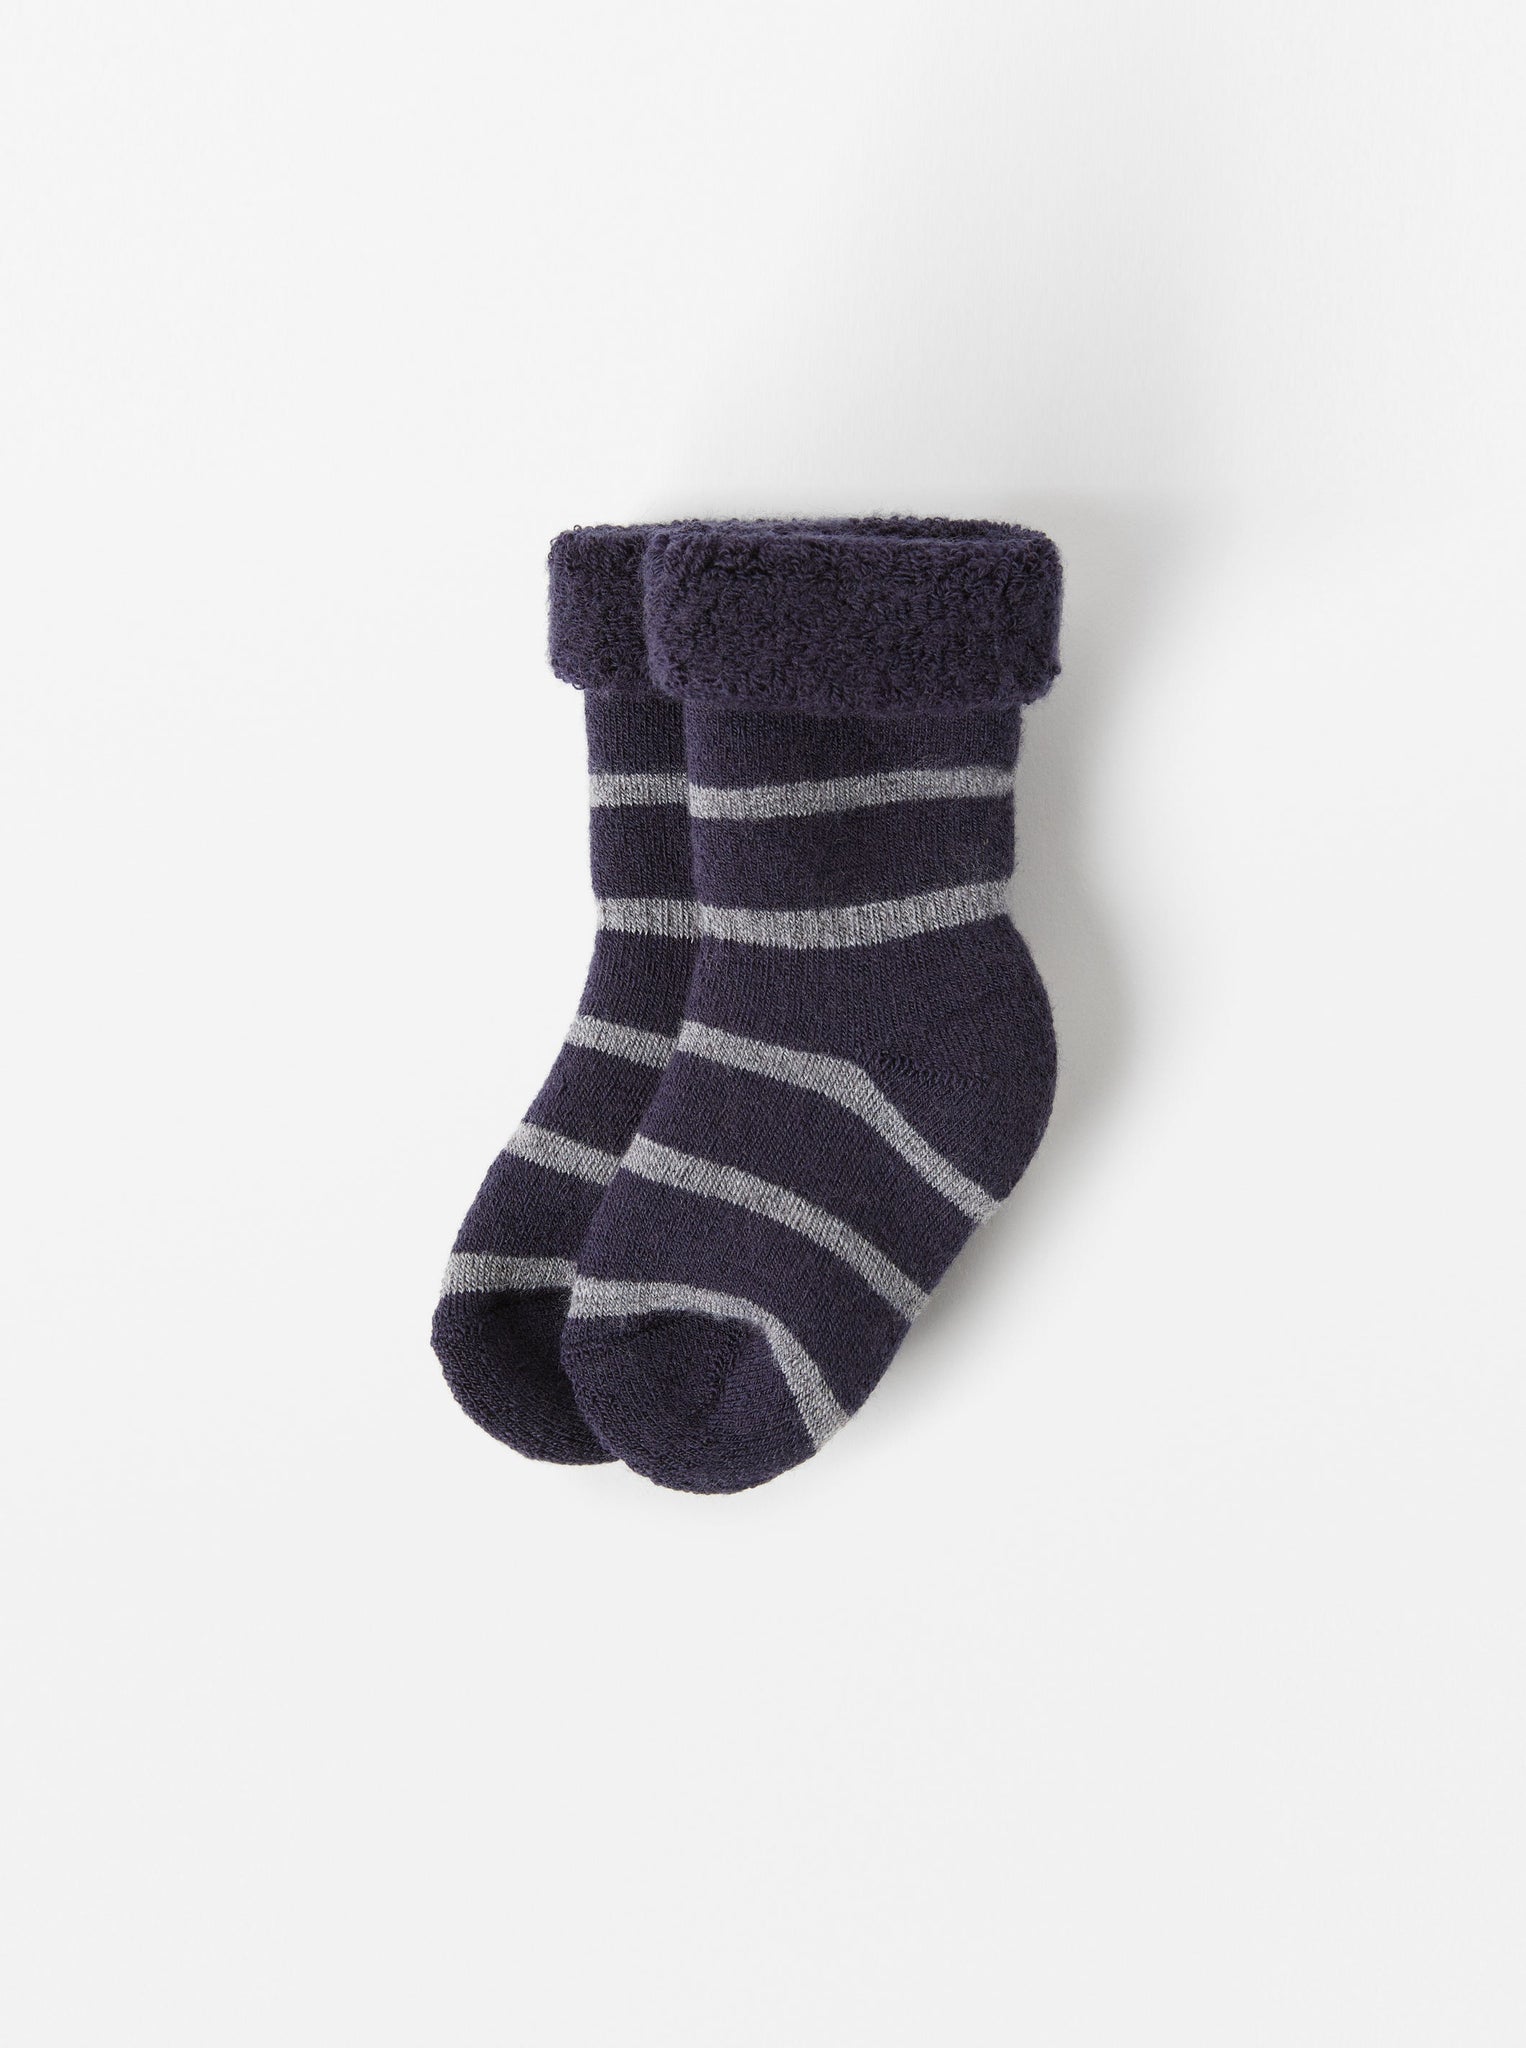 Terry Wool Navy Baby Socks from the Polarn O. Pyret kidswear collection. Ethically produced outerwear.